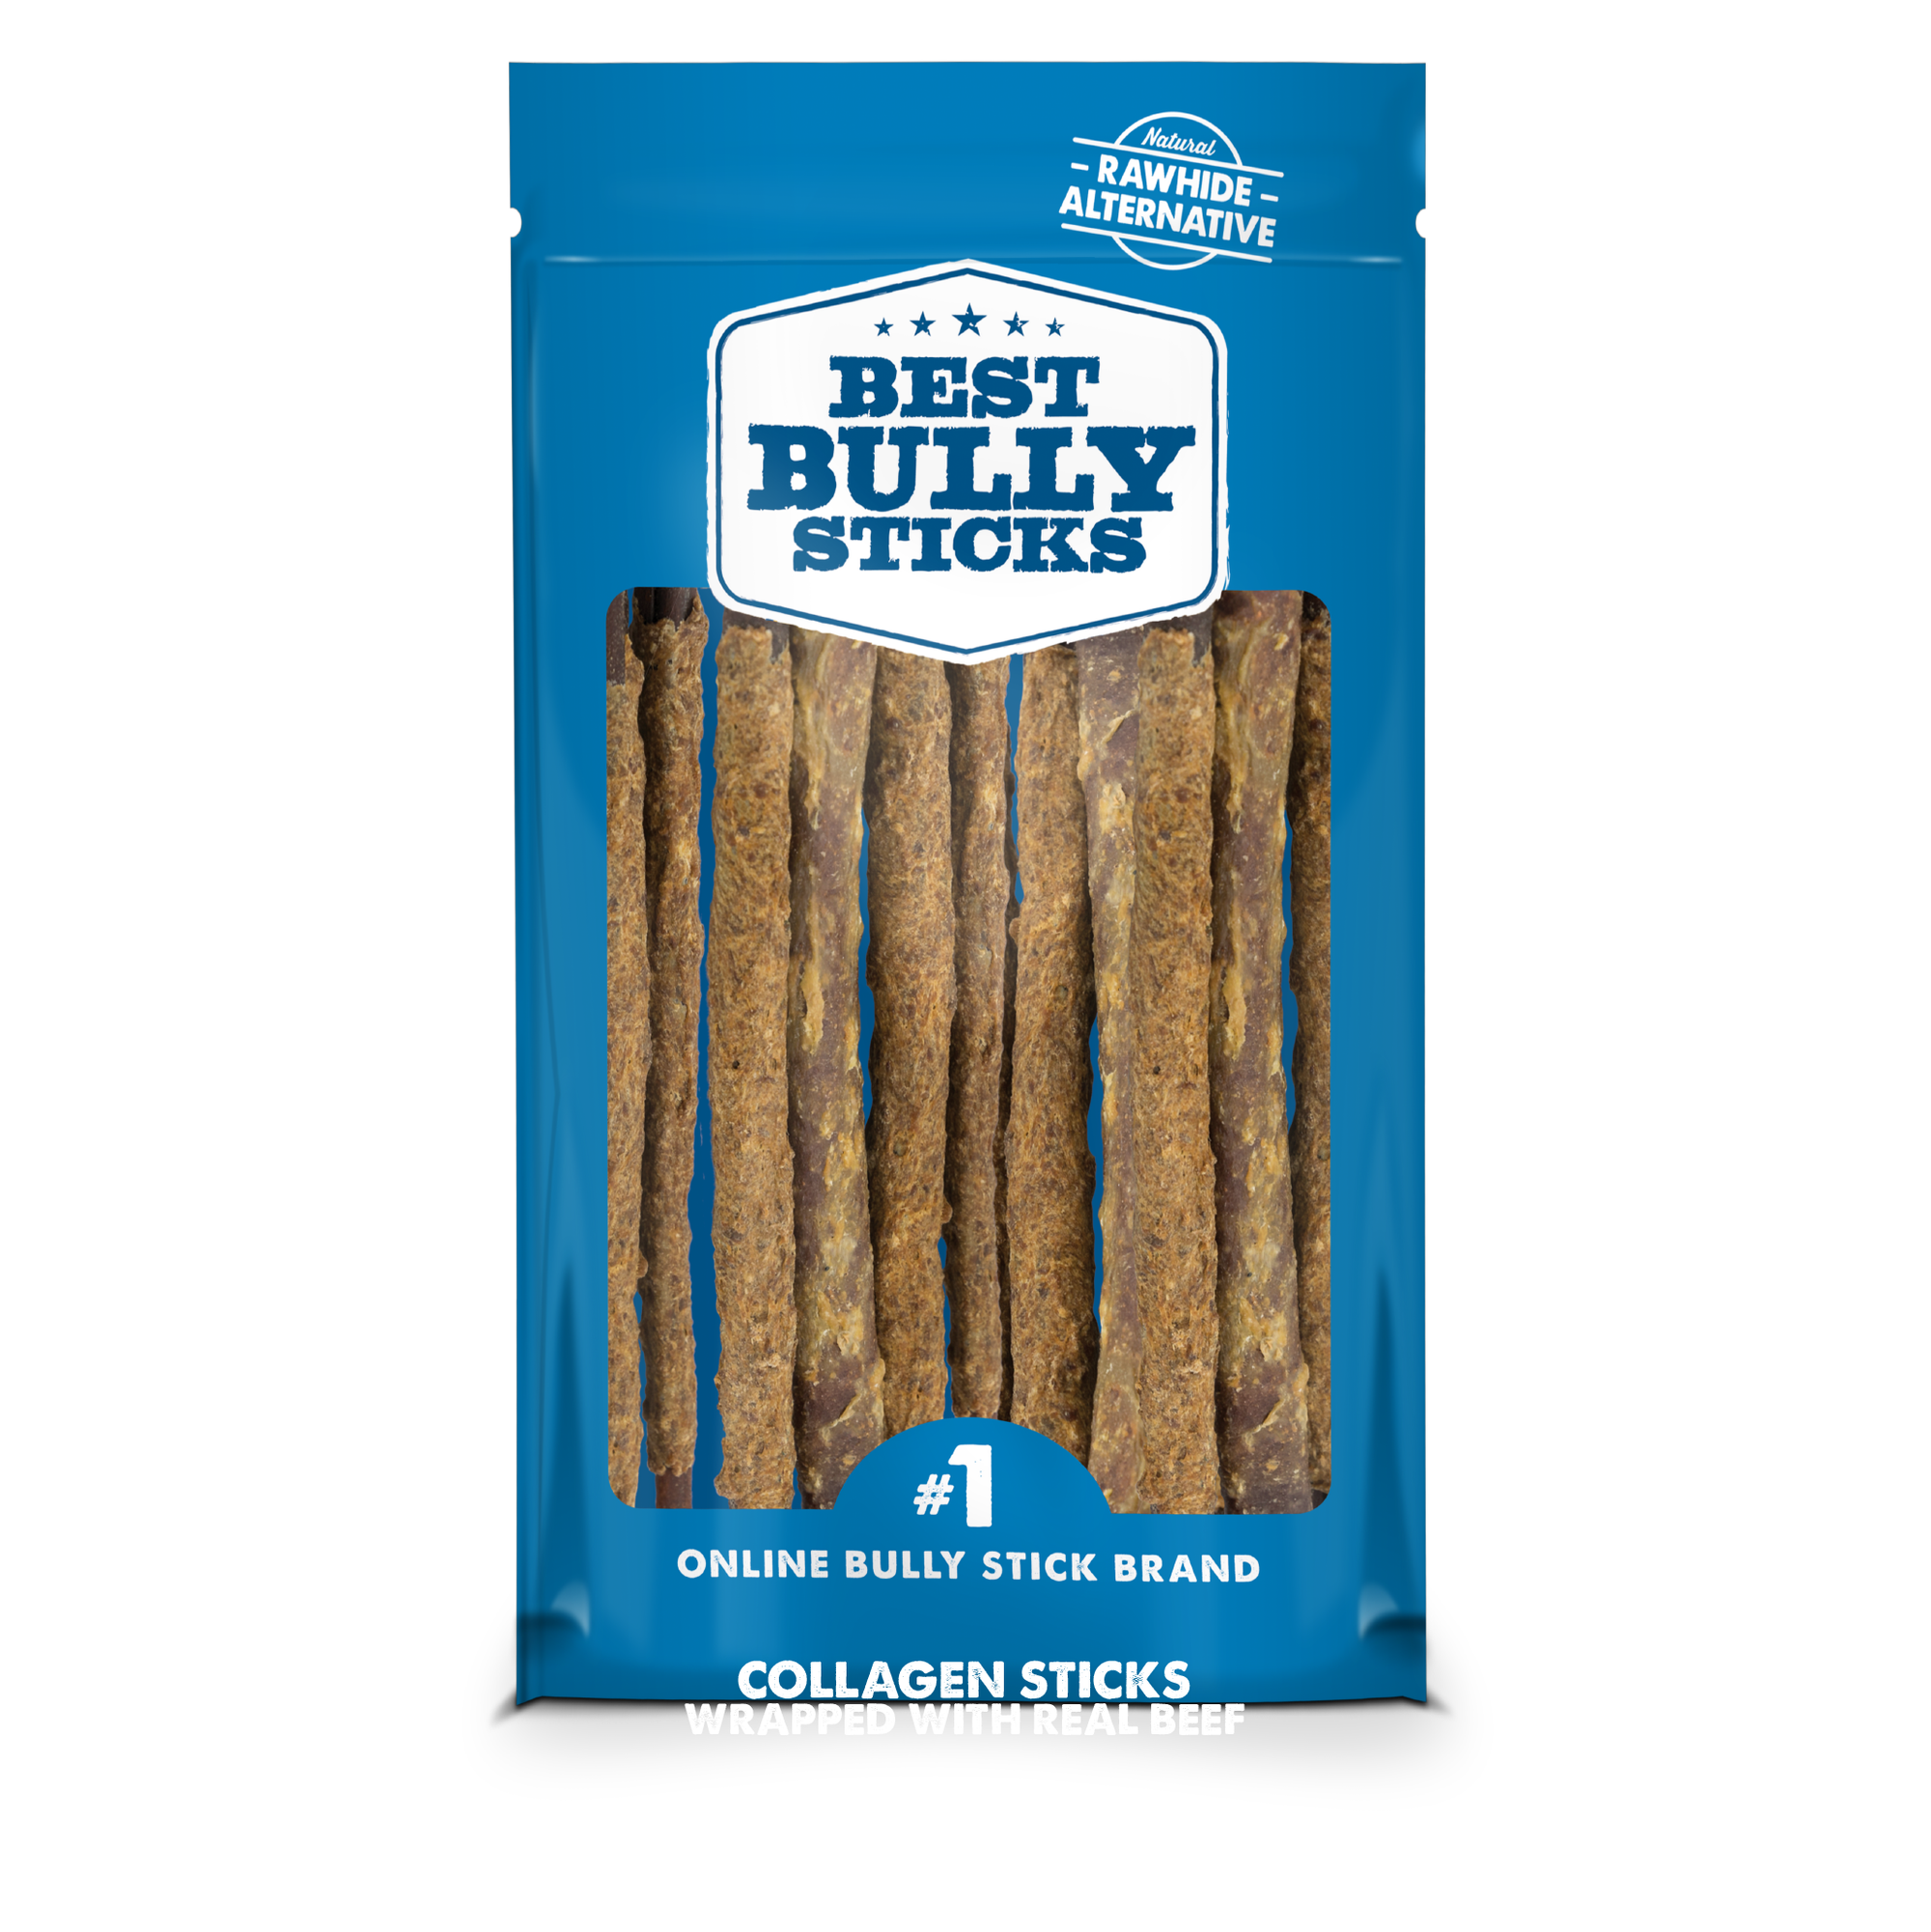 12 Inch Beef Wrapped Collagen Sticks in a package from Best Bully Sticks.